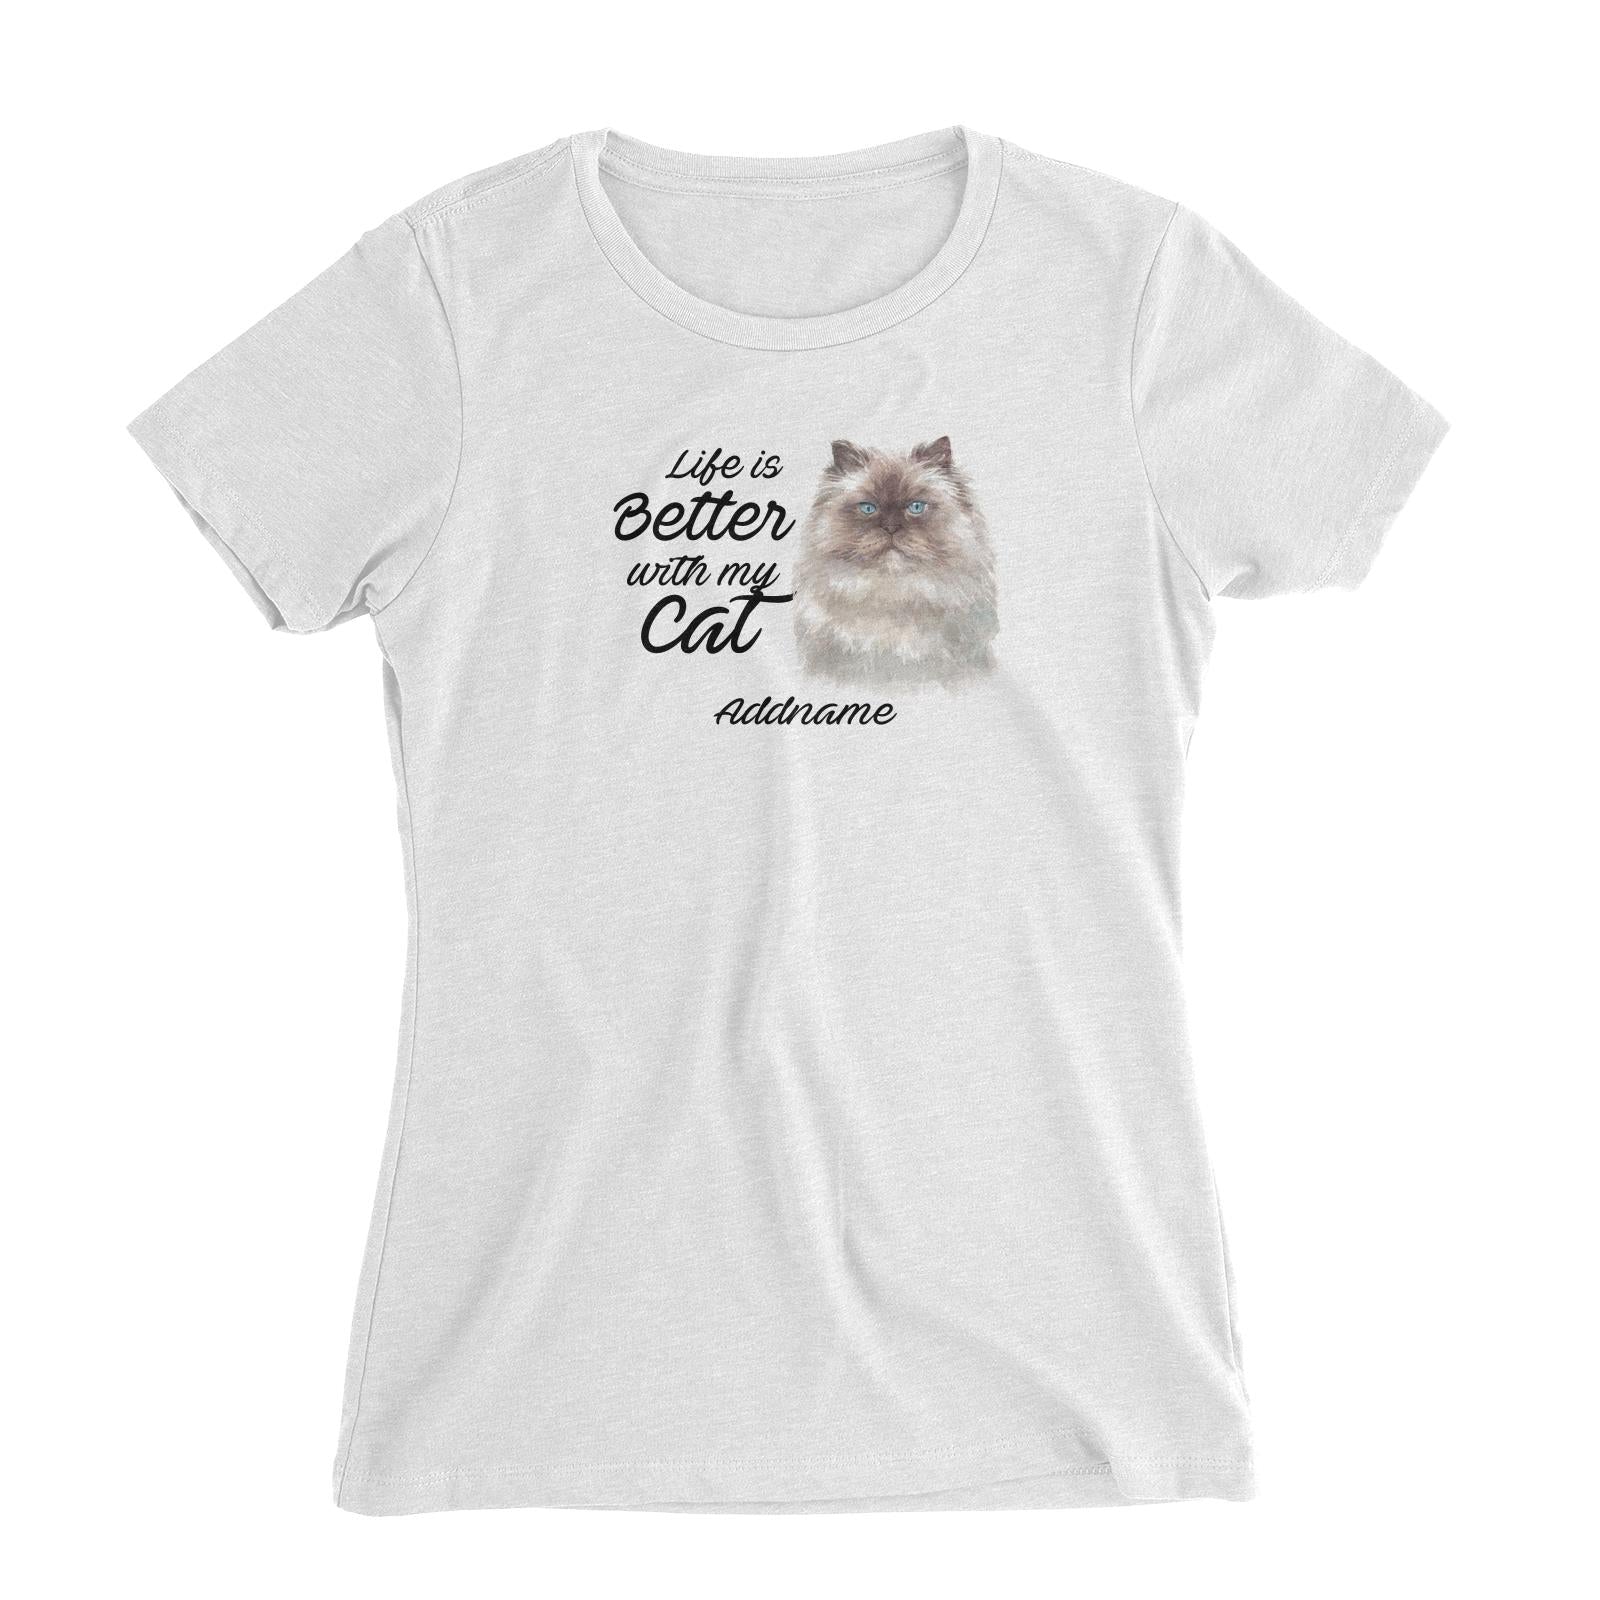 Watercolor Life is Better With My Cat Himalayan White Addname Women's Slim Fit T-Shirt